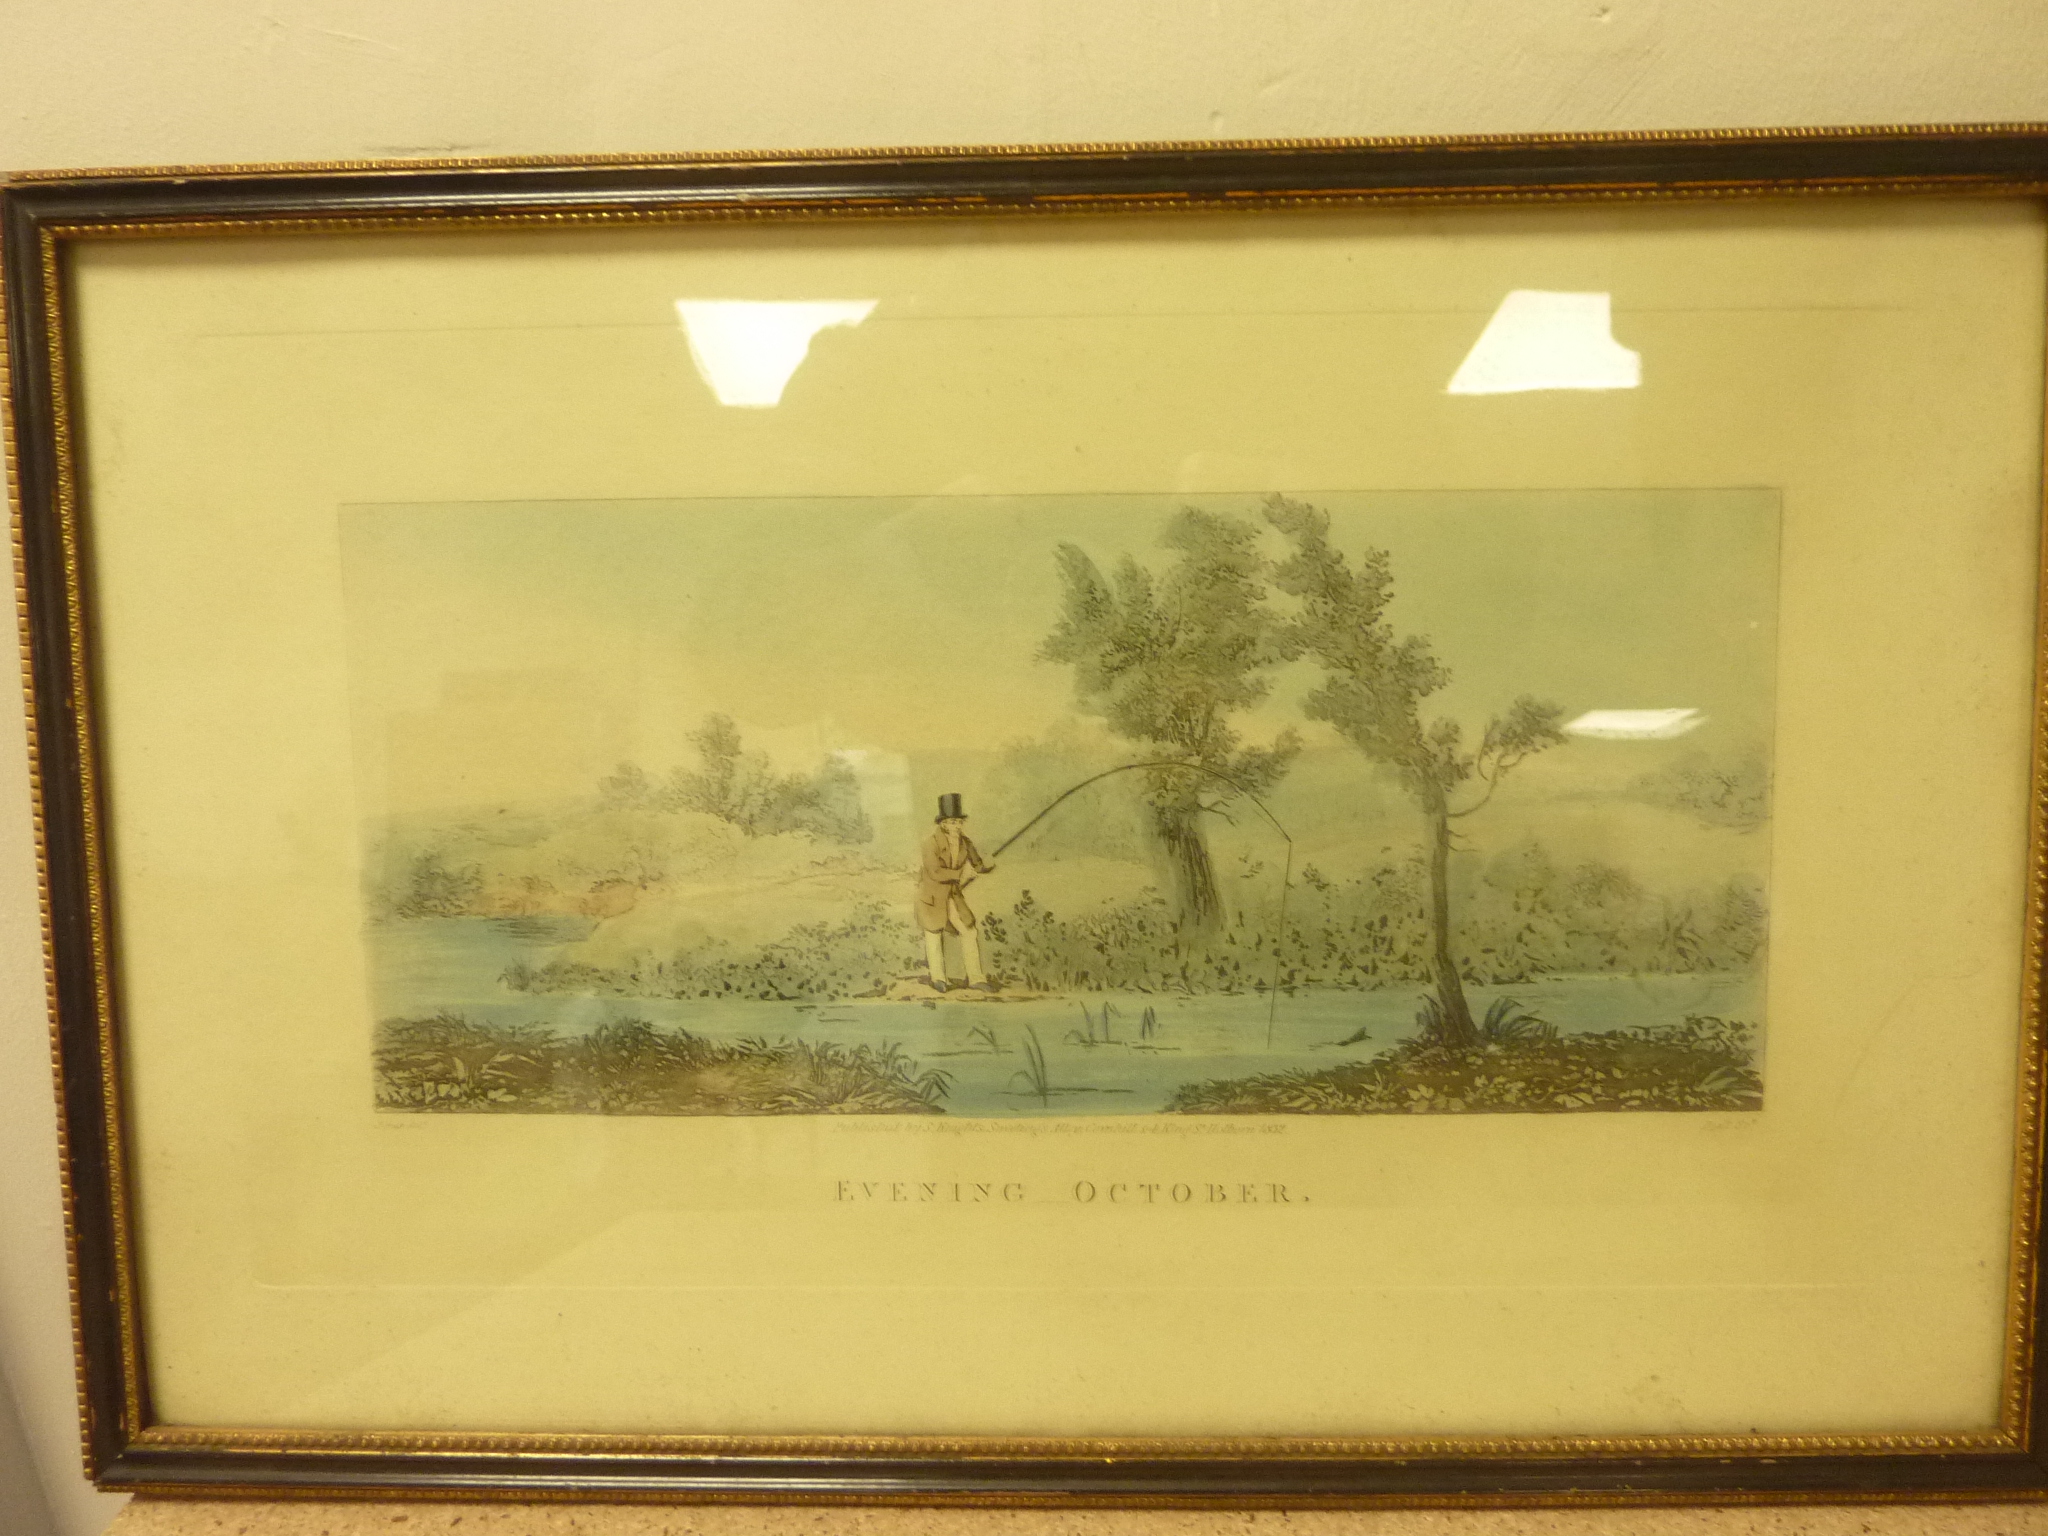 PYALL AFTER JONES. Evening-October & May, Fly-Fishing. Pair of coloured angling prints, framed. - Image 2 of 5